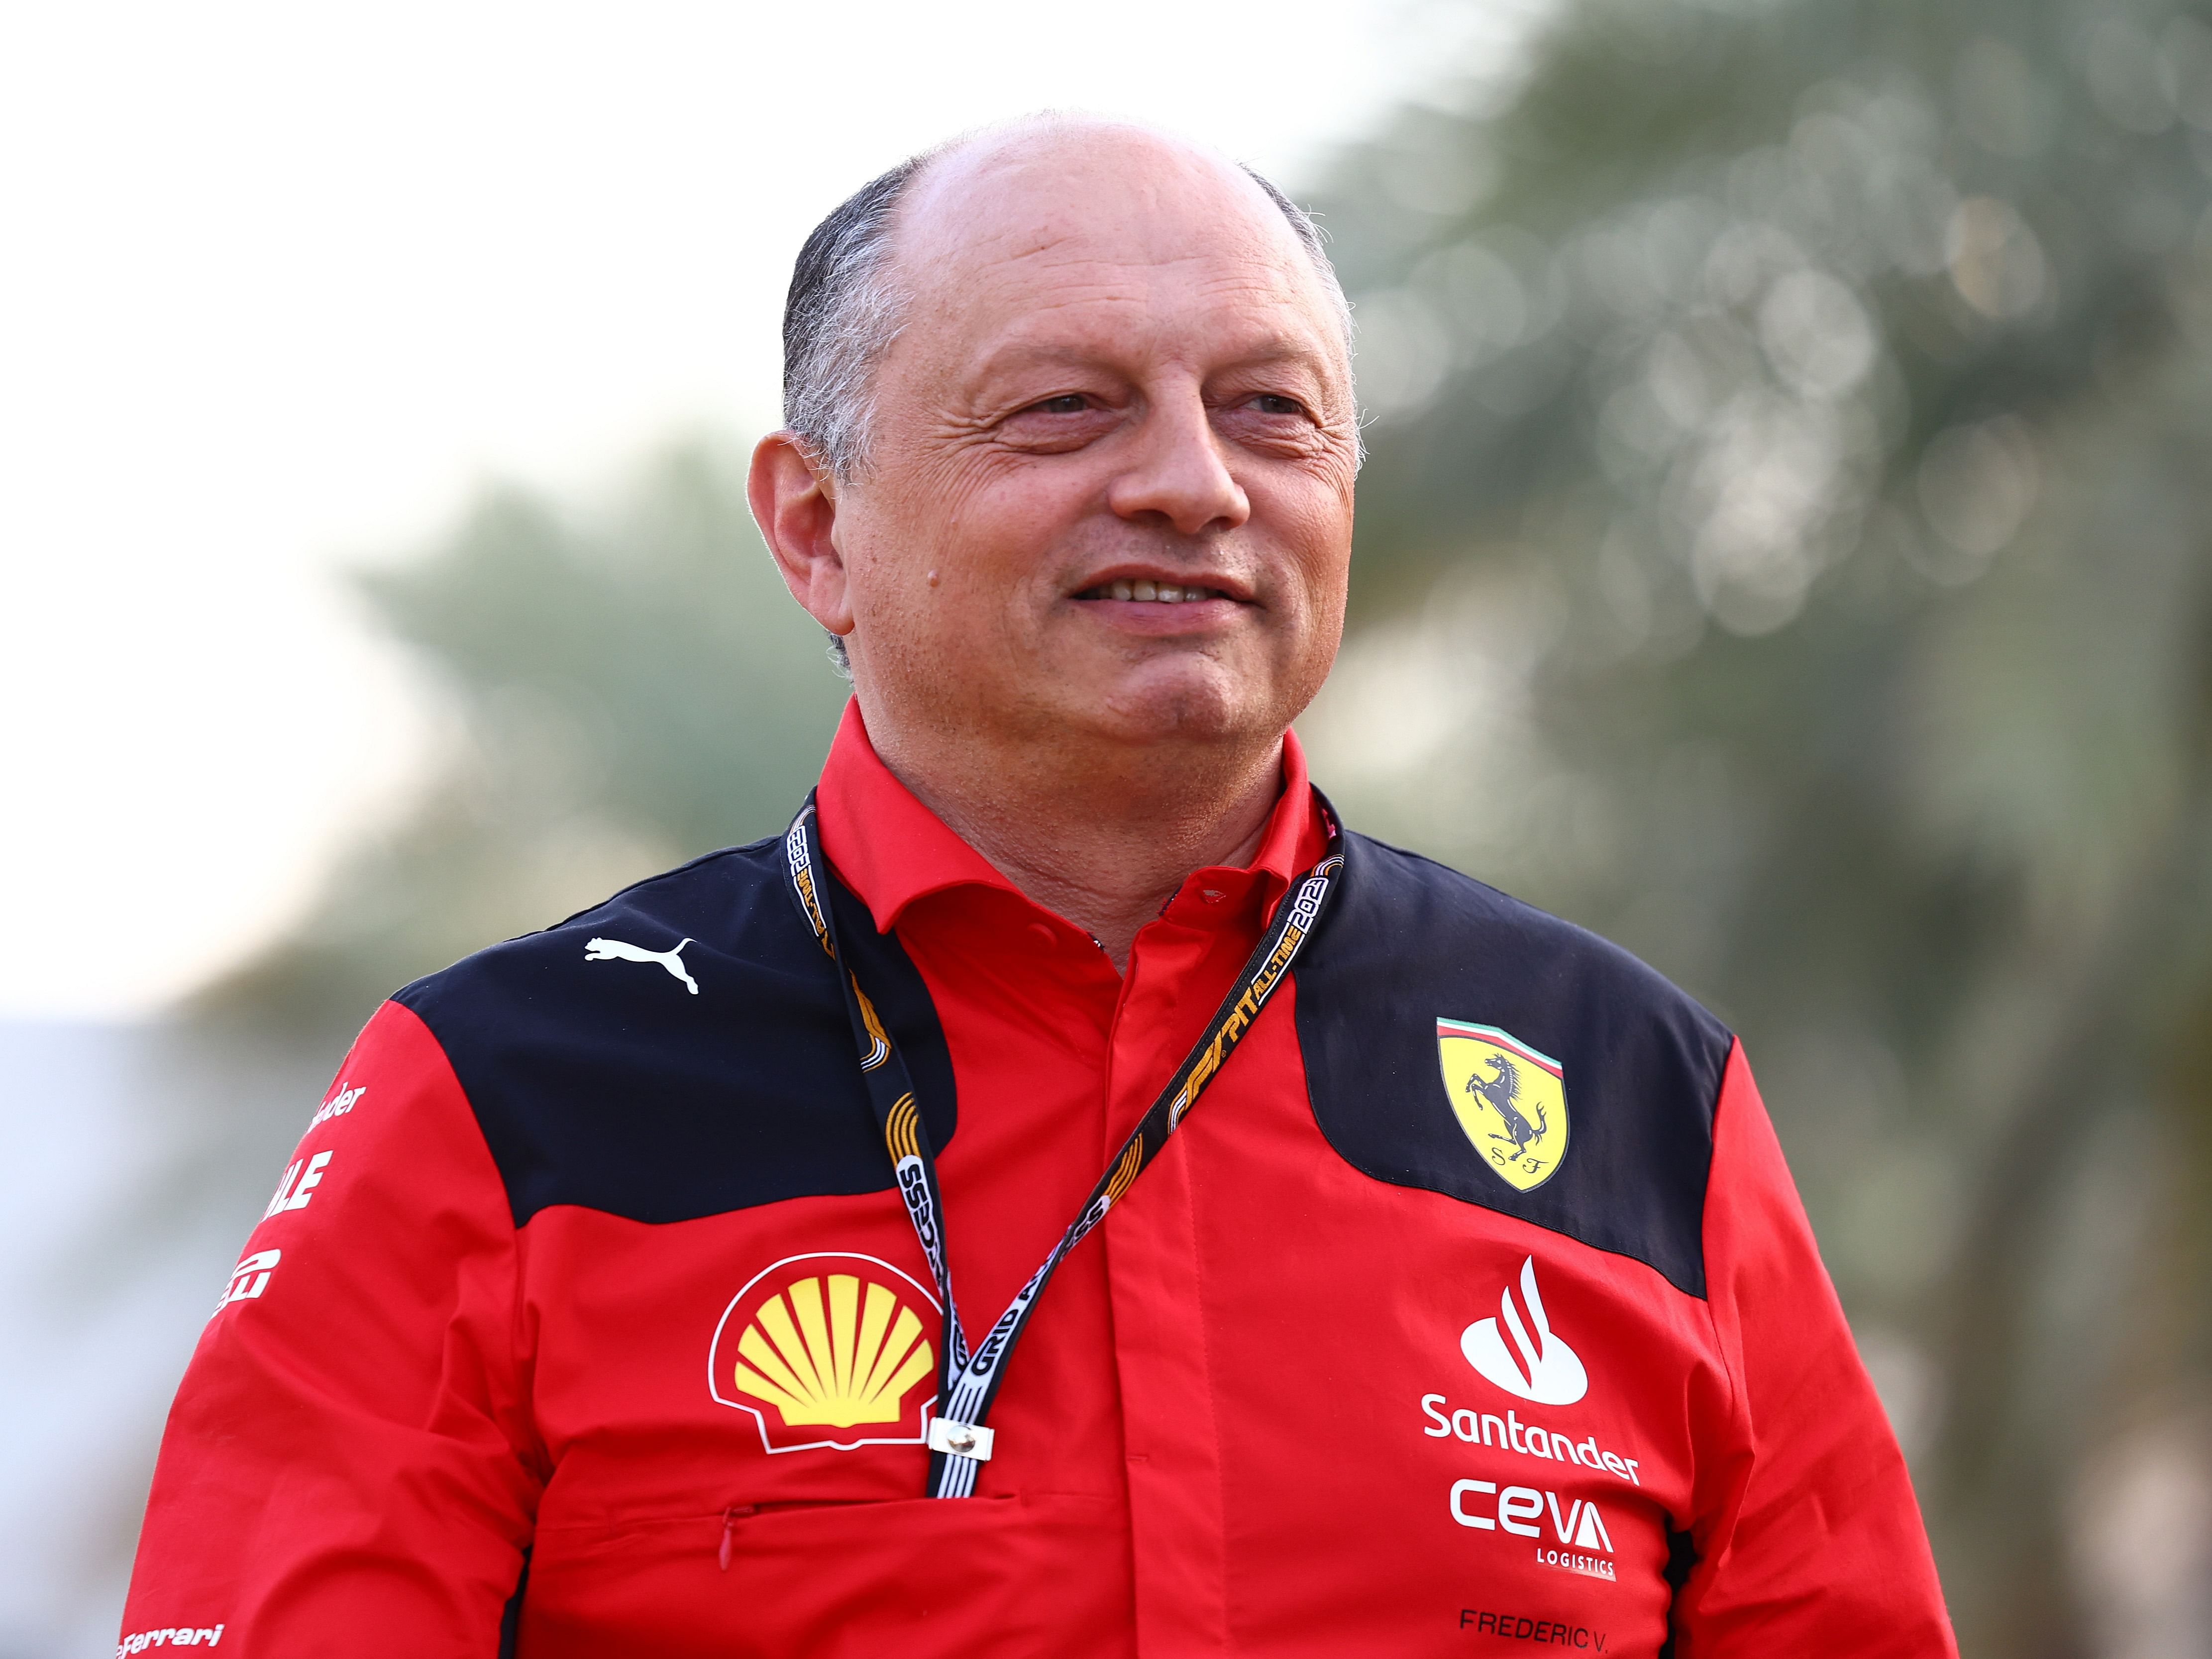 Frederic Vasseur walks in the paddock during practice ahead of the 2023 F1 Bahrain Grand Prix (Photo by Mark Thompson/Getty Images)